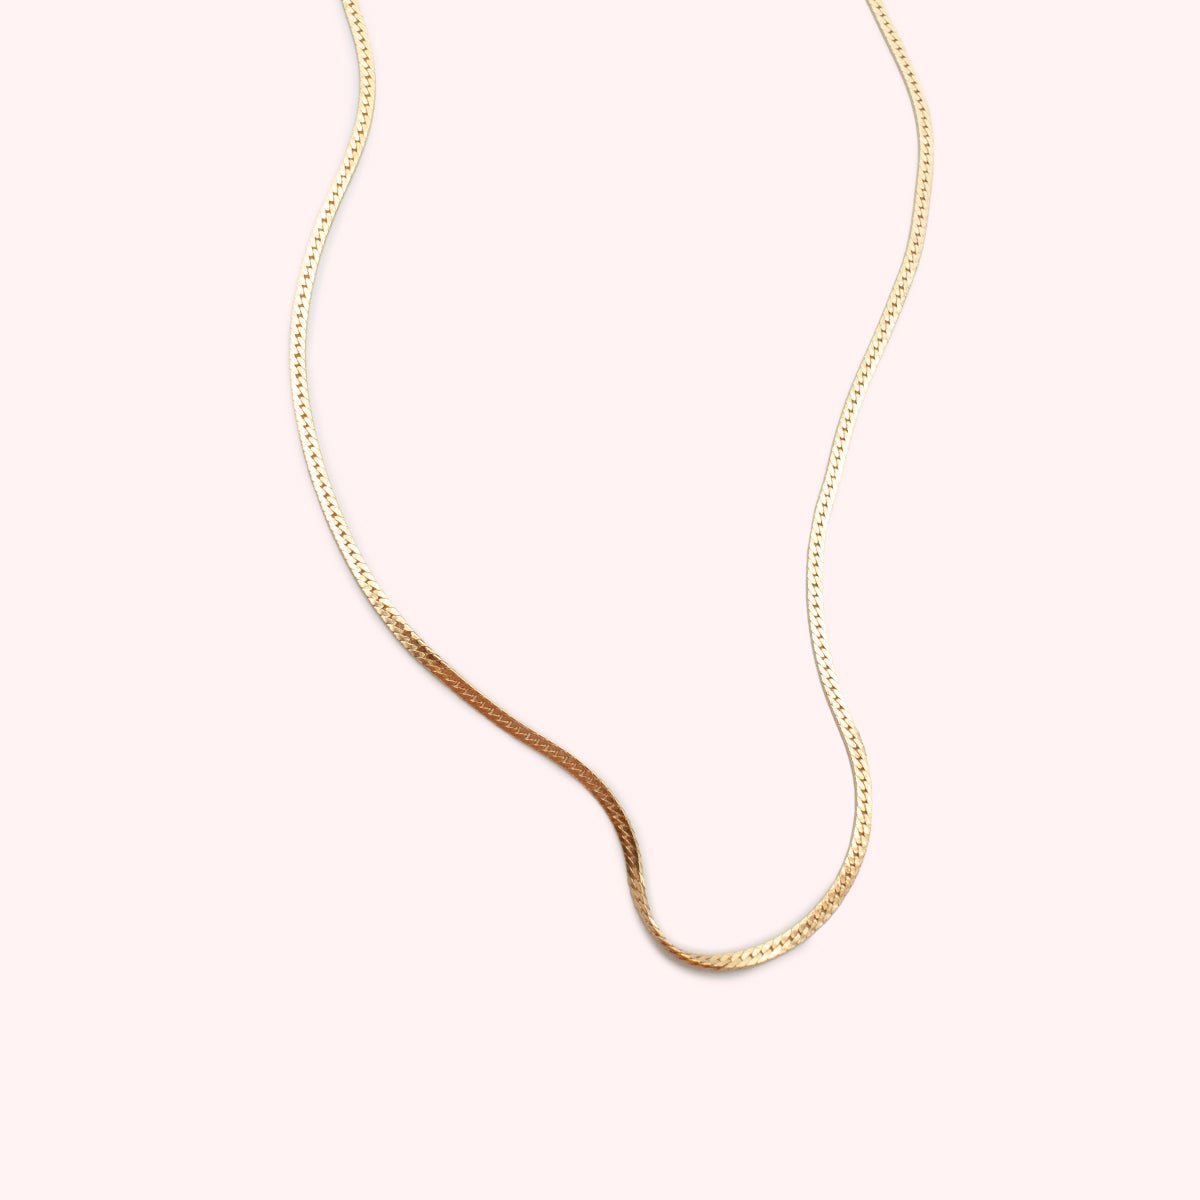 A delicate herringbone chain necklace in 14 karat gold fill. The Delicate Here is handcrafted by Hello Adorn in Eau Claire, WI.